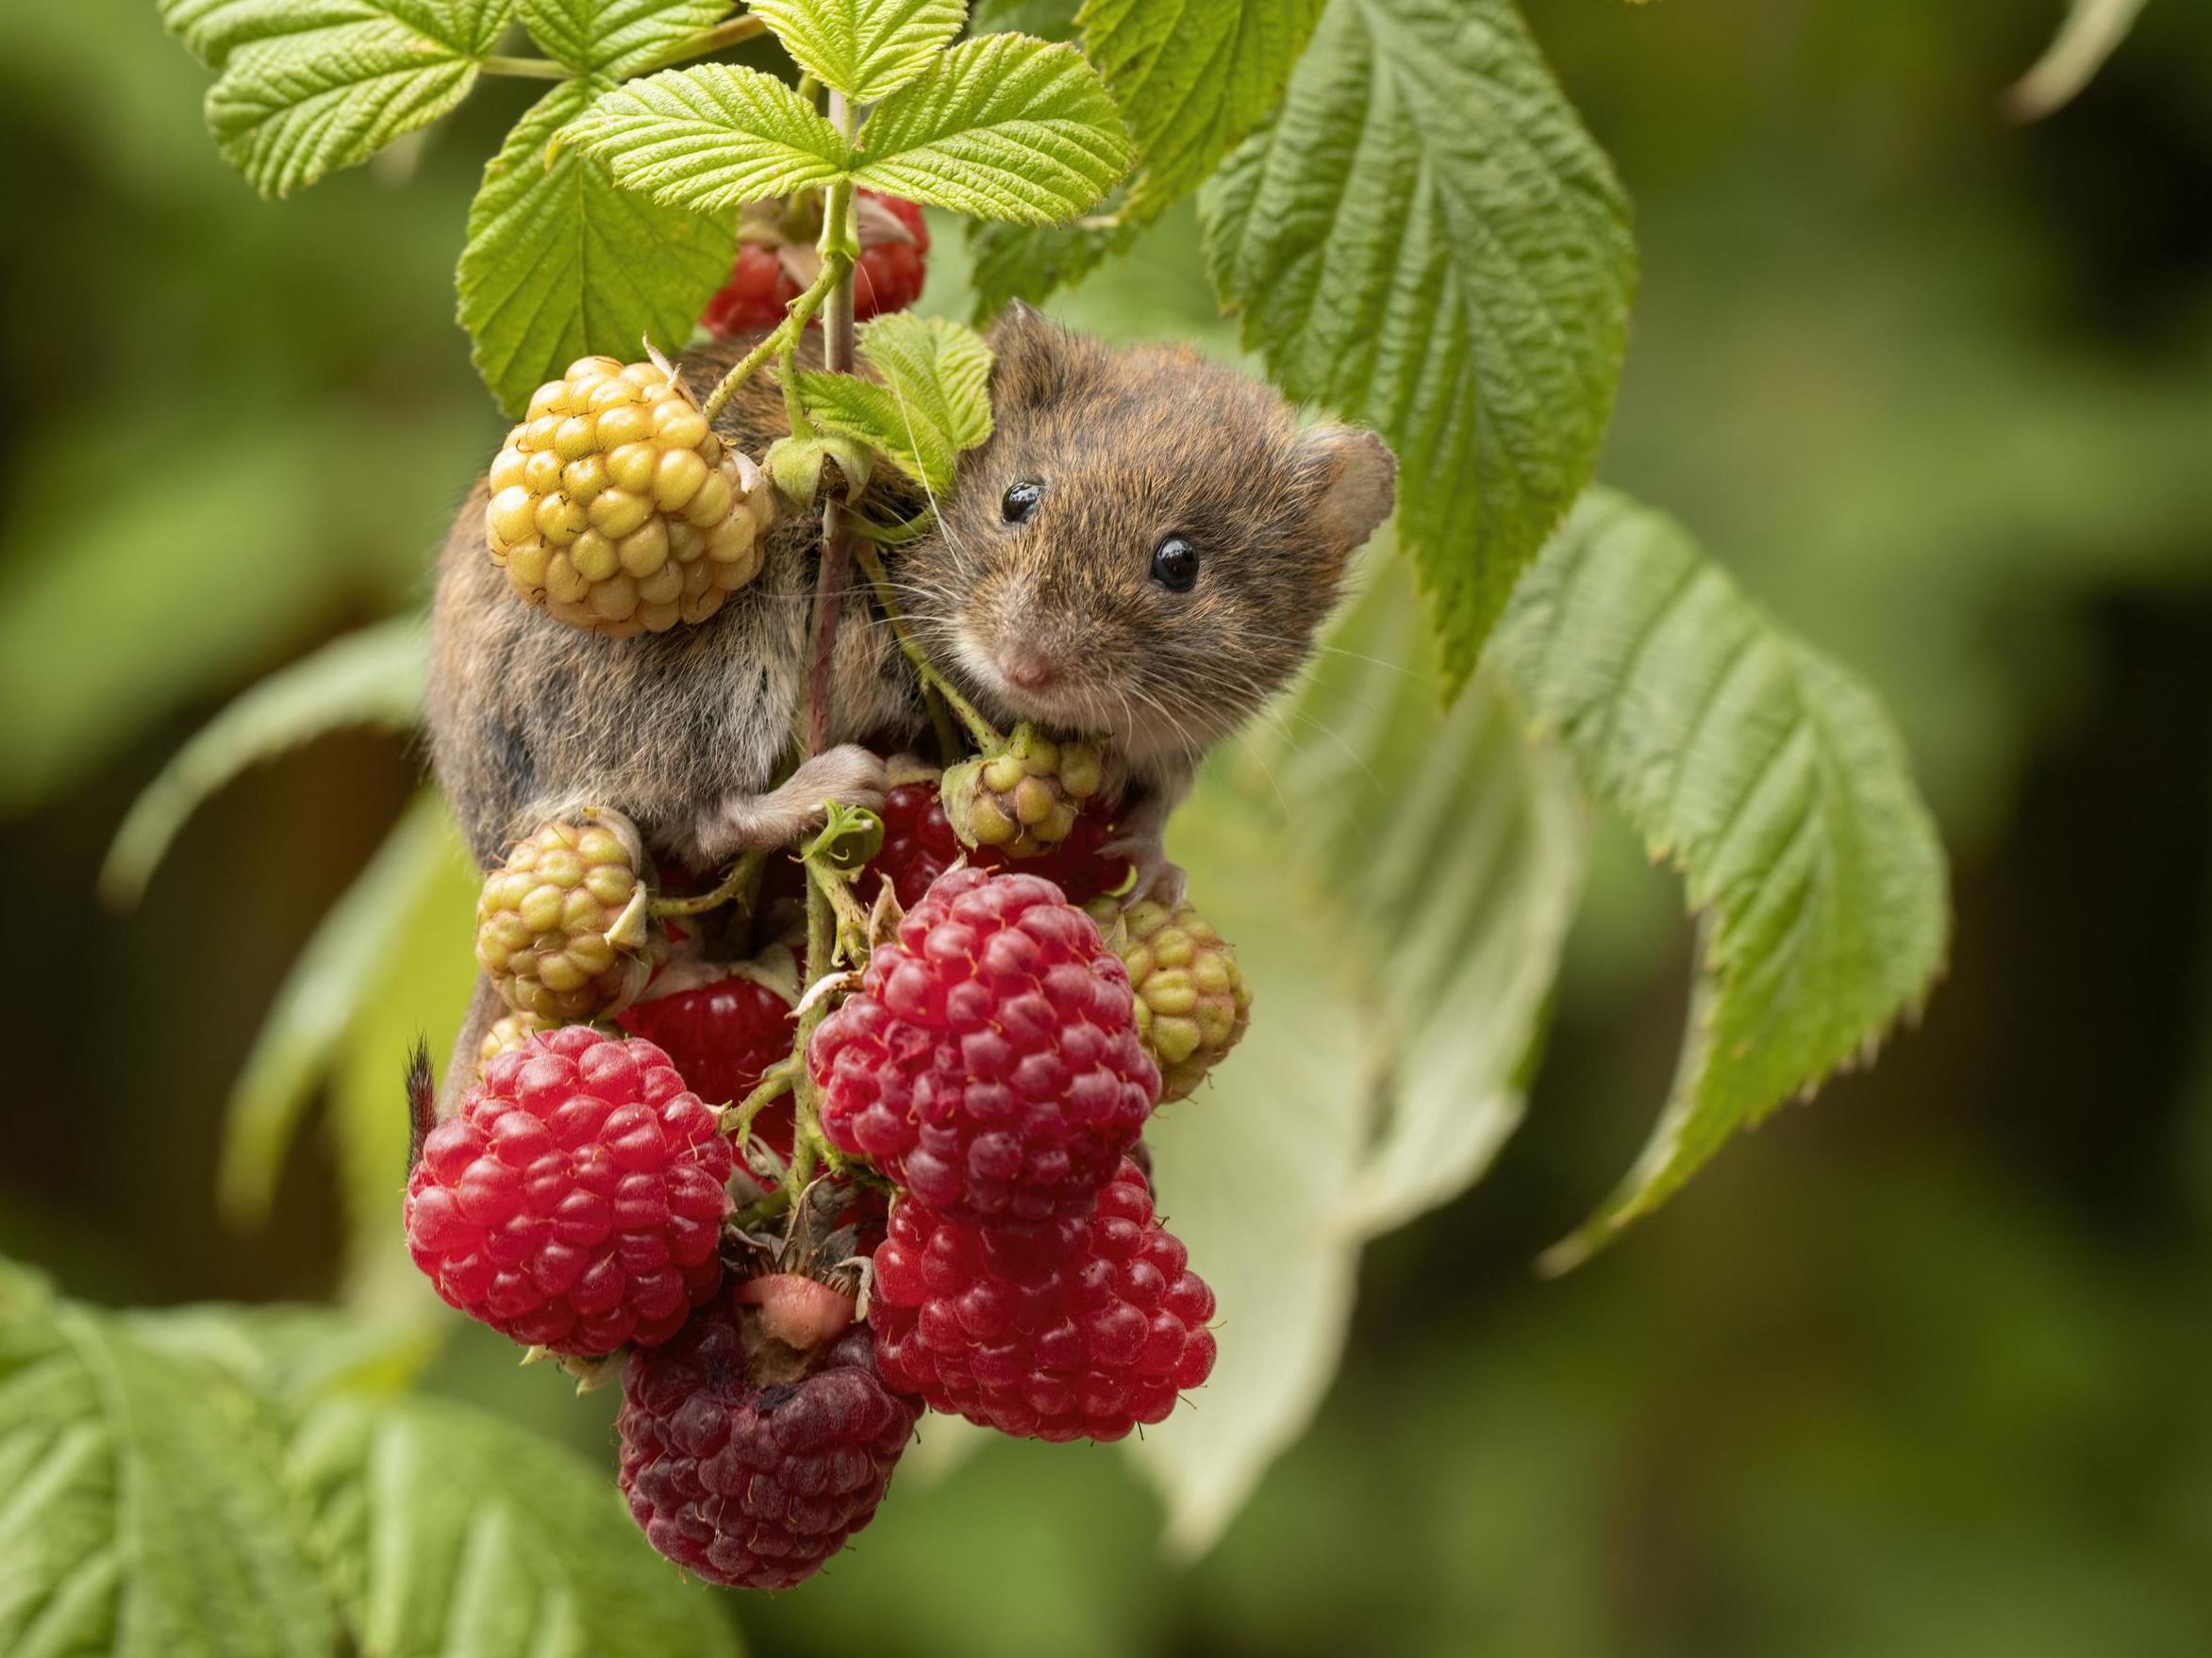 The new Environment Bill includes policies on water quality and promoting biodiversity. Pictured is a bank vole on raspberries